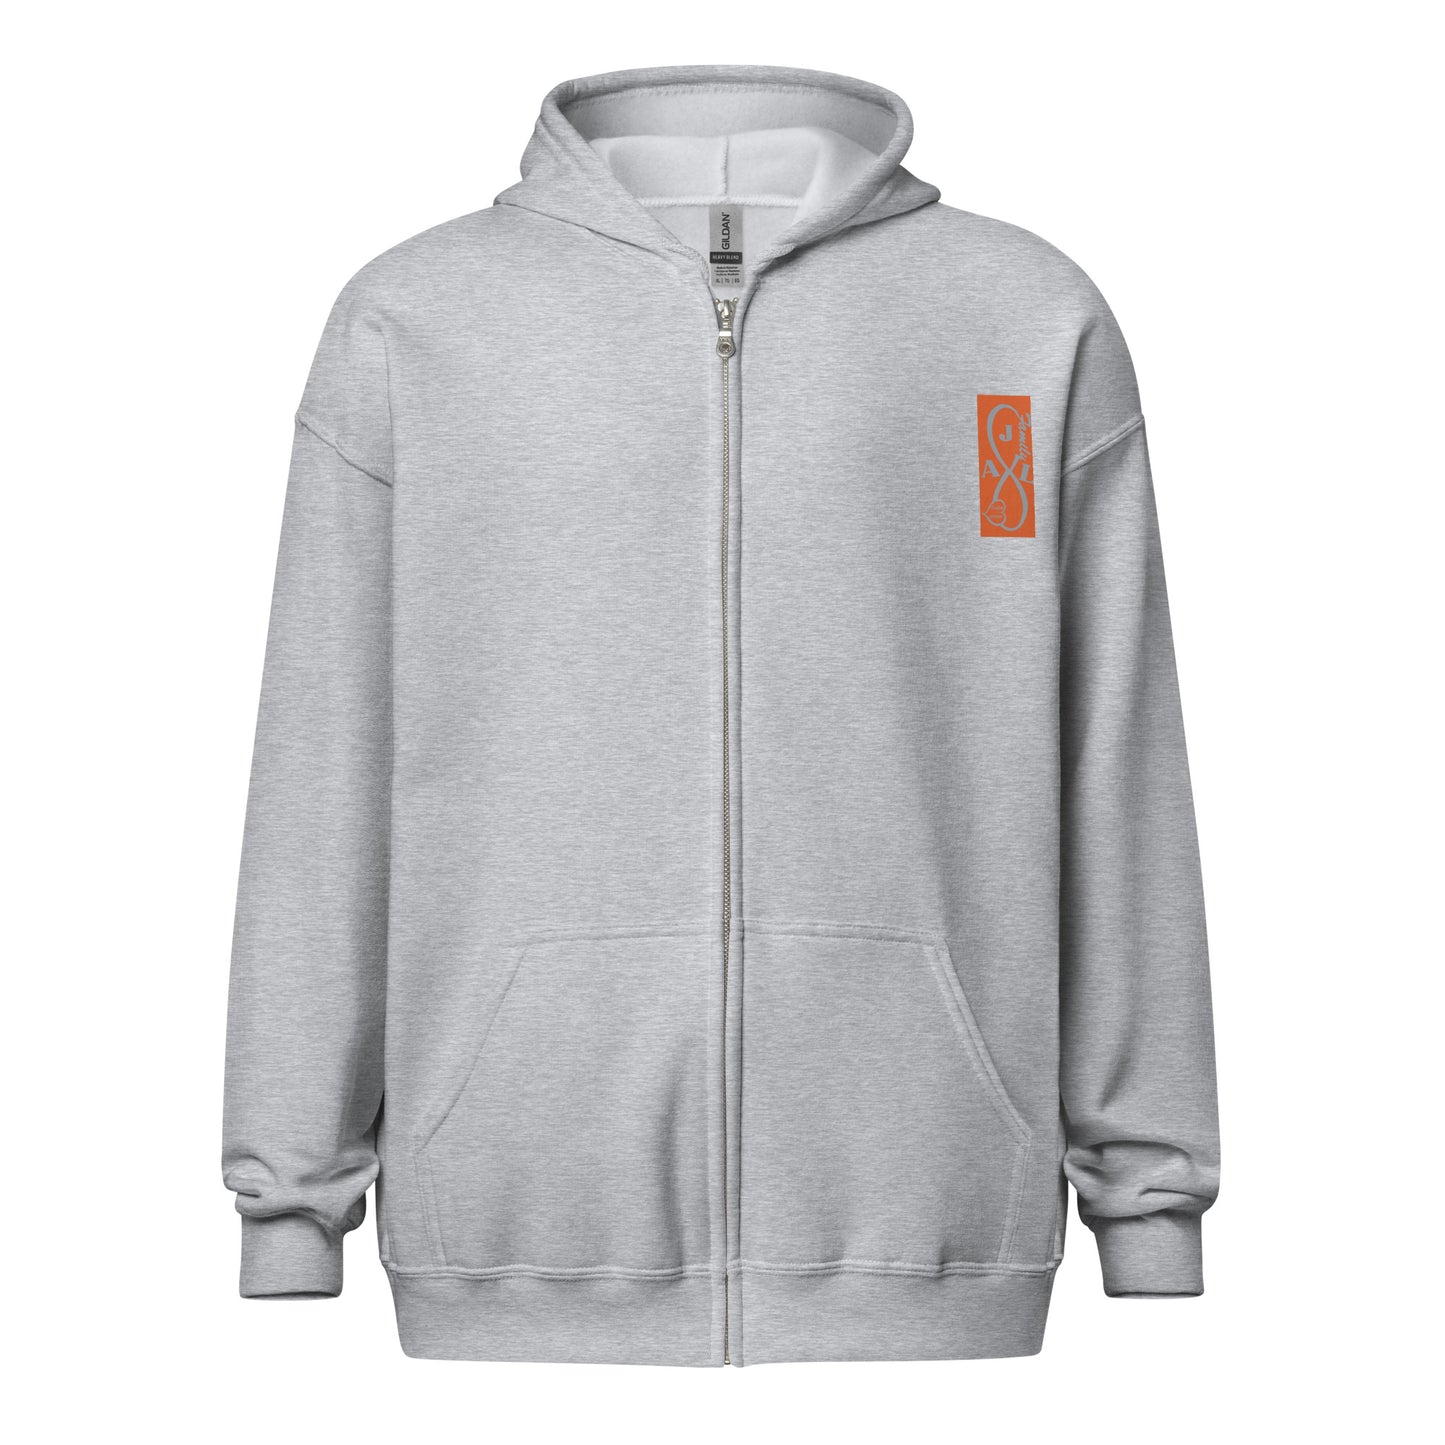 AJL Collection heavy blend zip hoodie